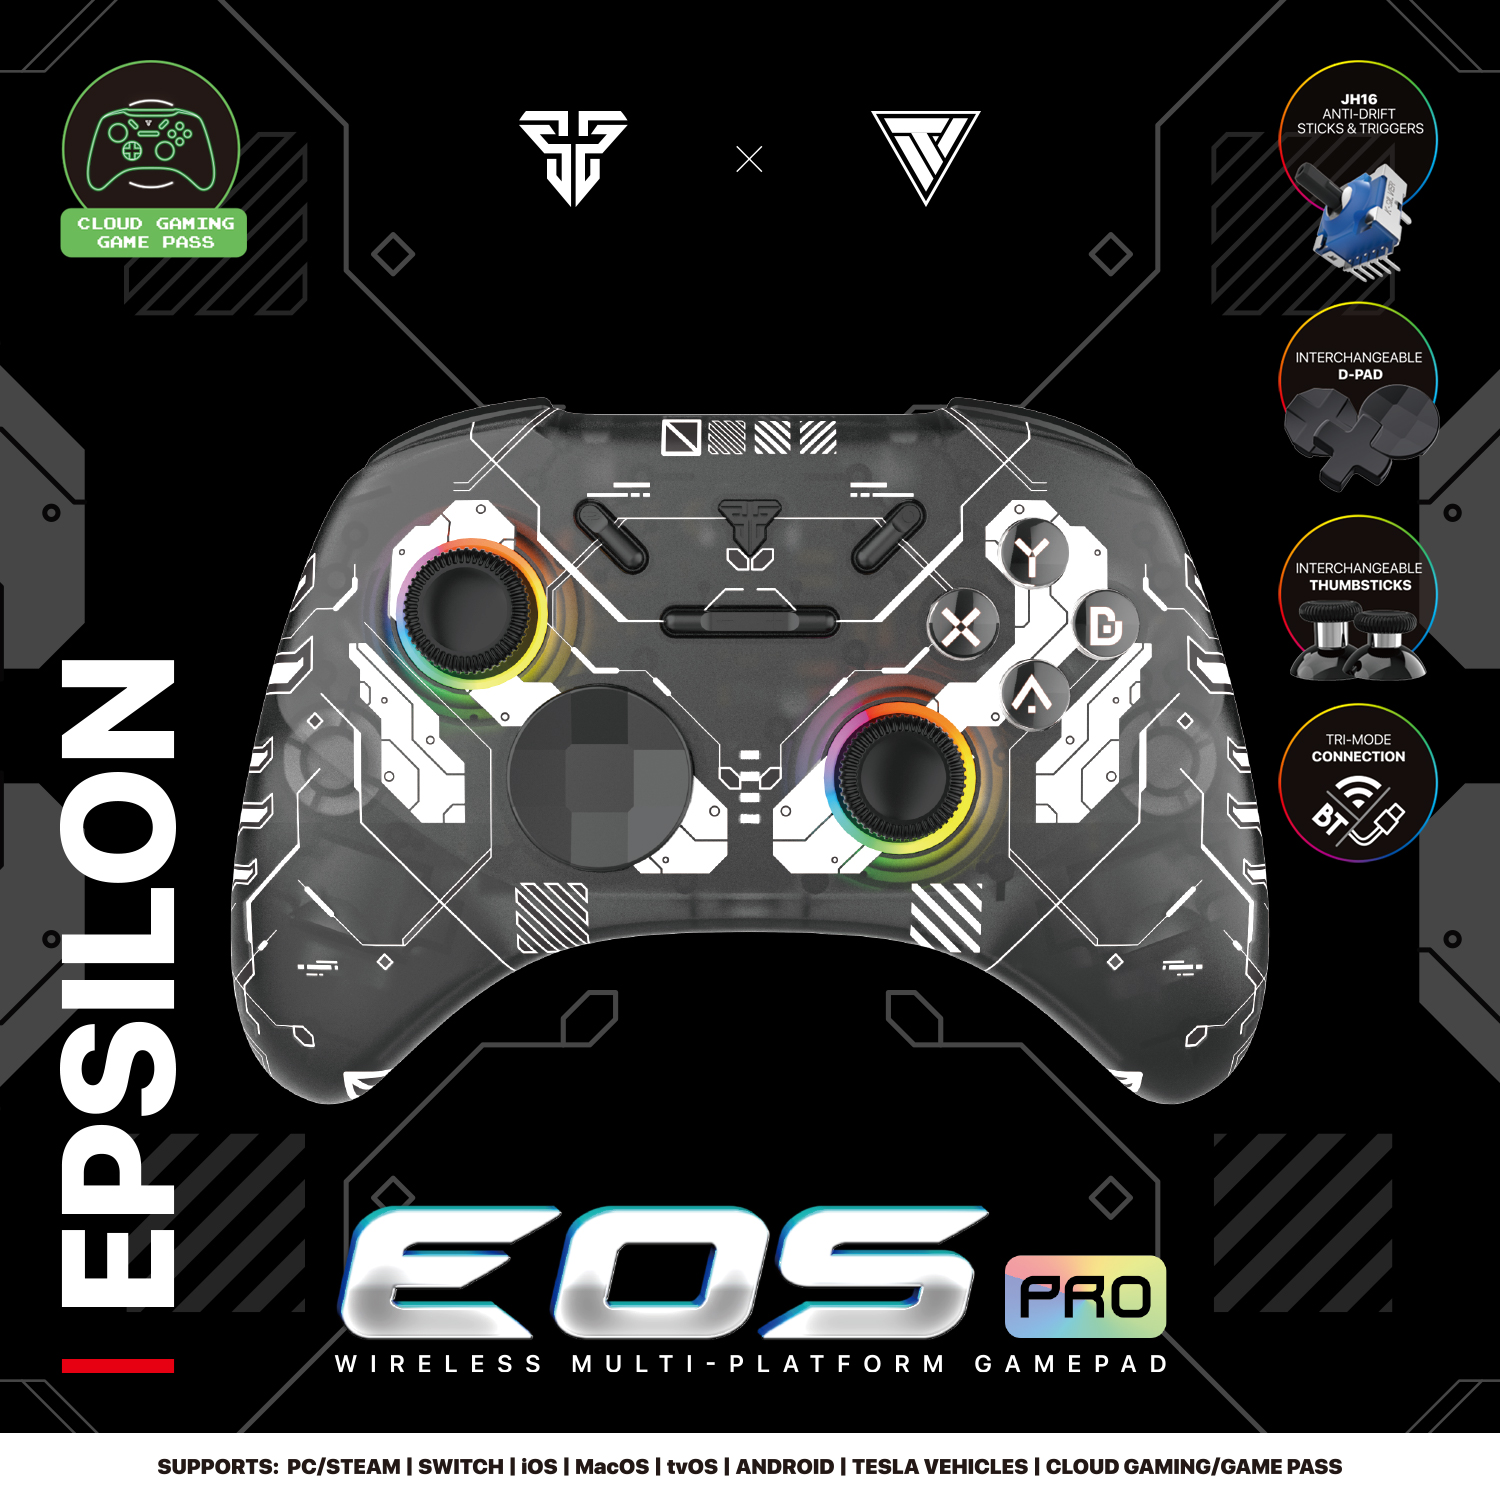 A large marketing image providing additional information about the product Fantech EOS Pro Gamepad Wireless Multi-Platform Hall-Effect Game Controller - Black - Additional alt info not provided